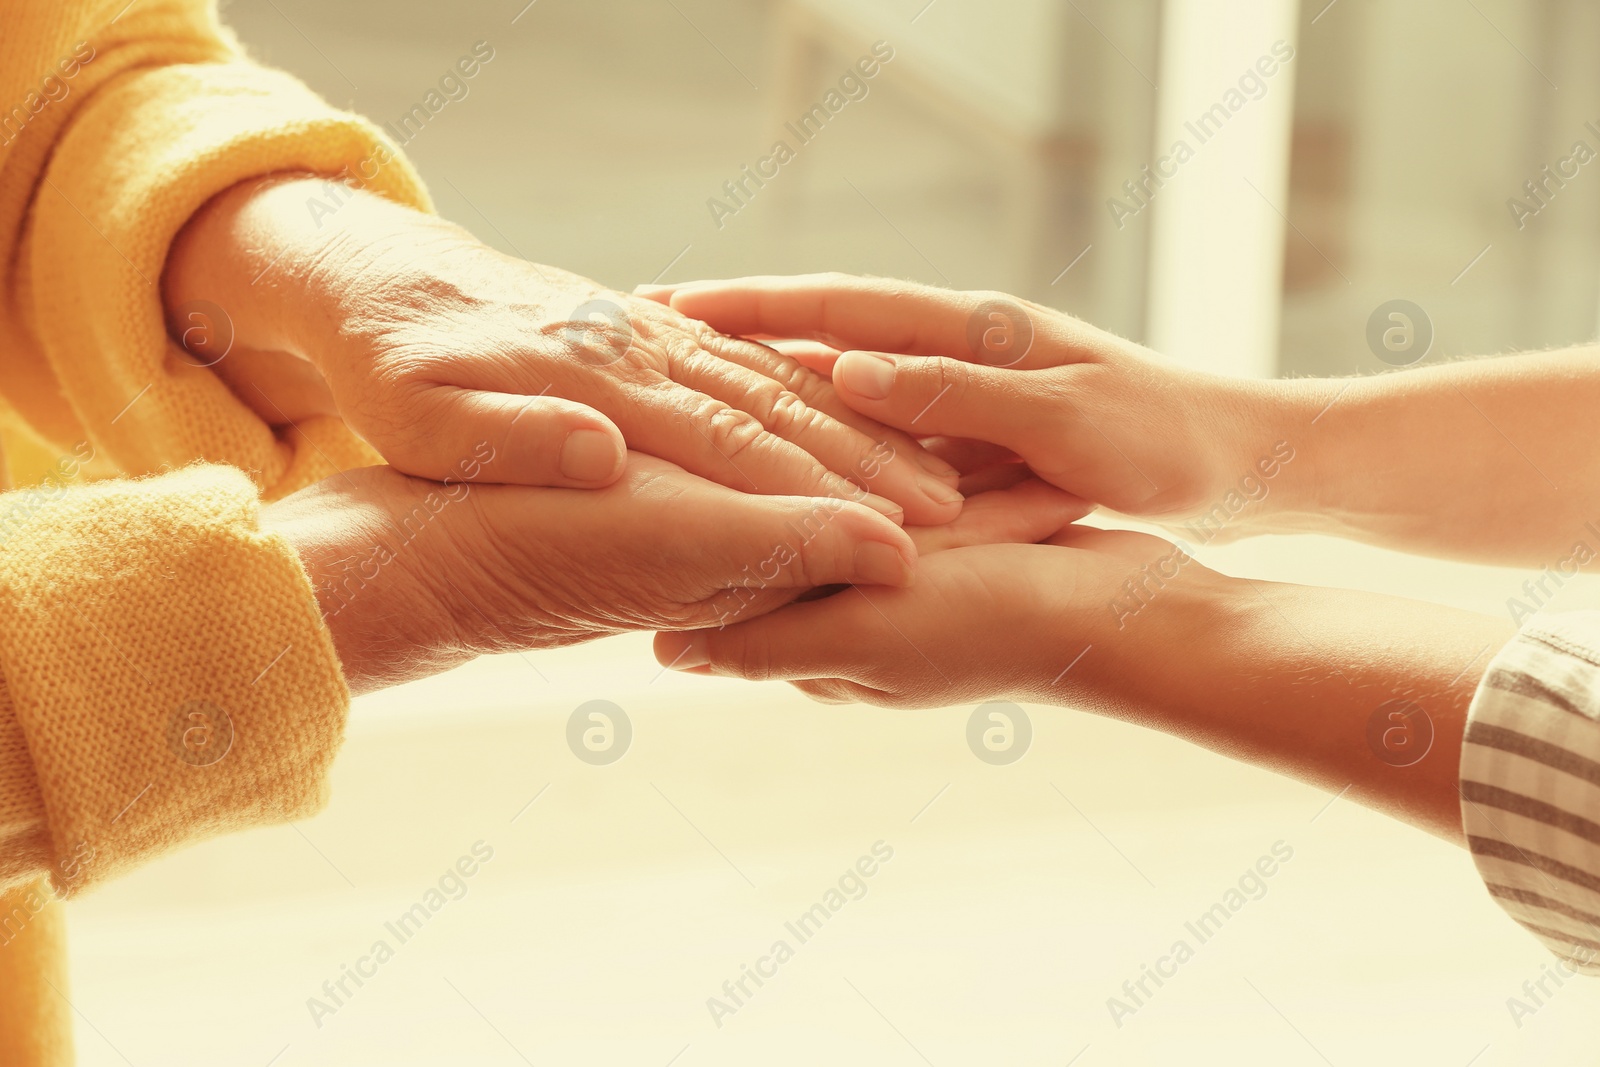 Image of Helping hands on blurred background, closeup. Elderly care concept